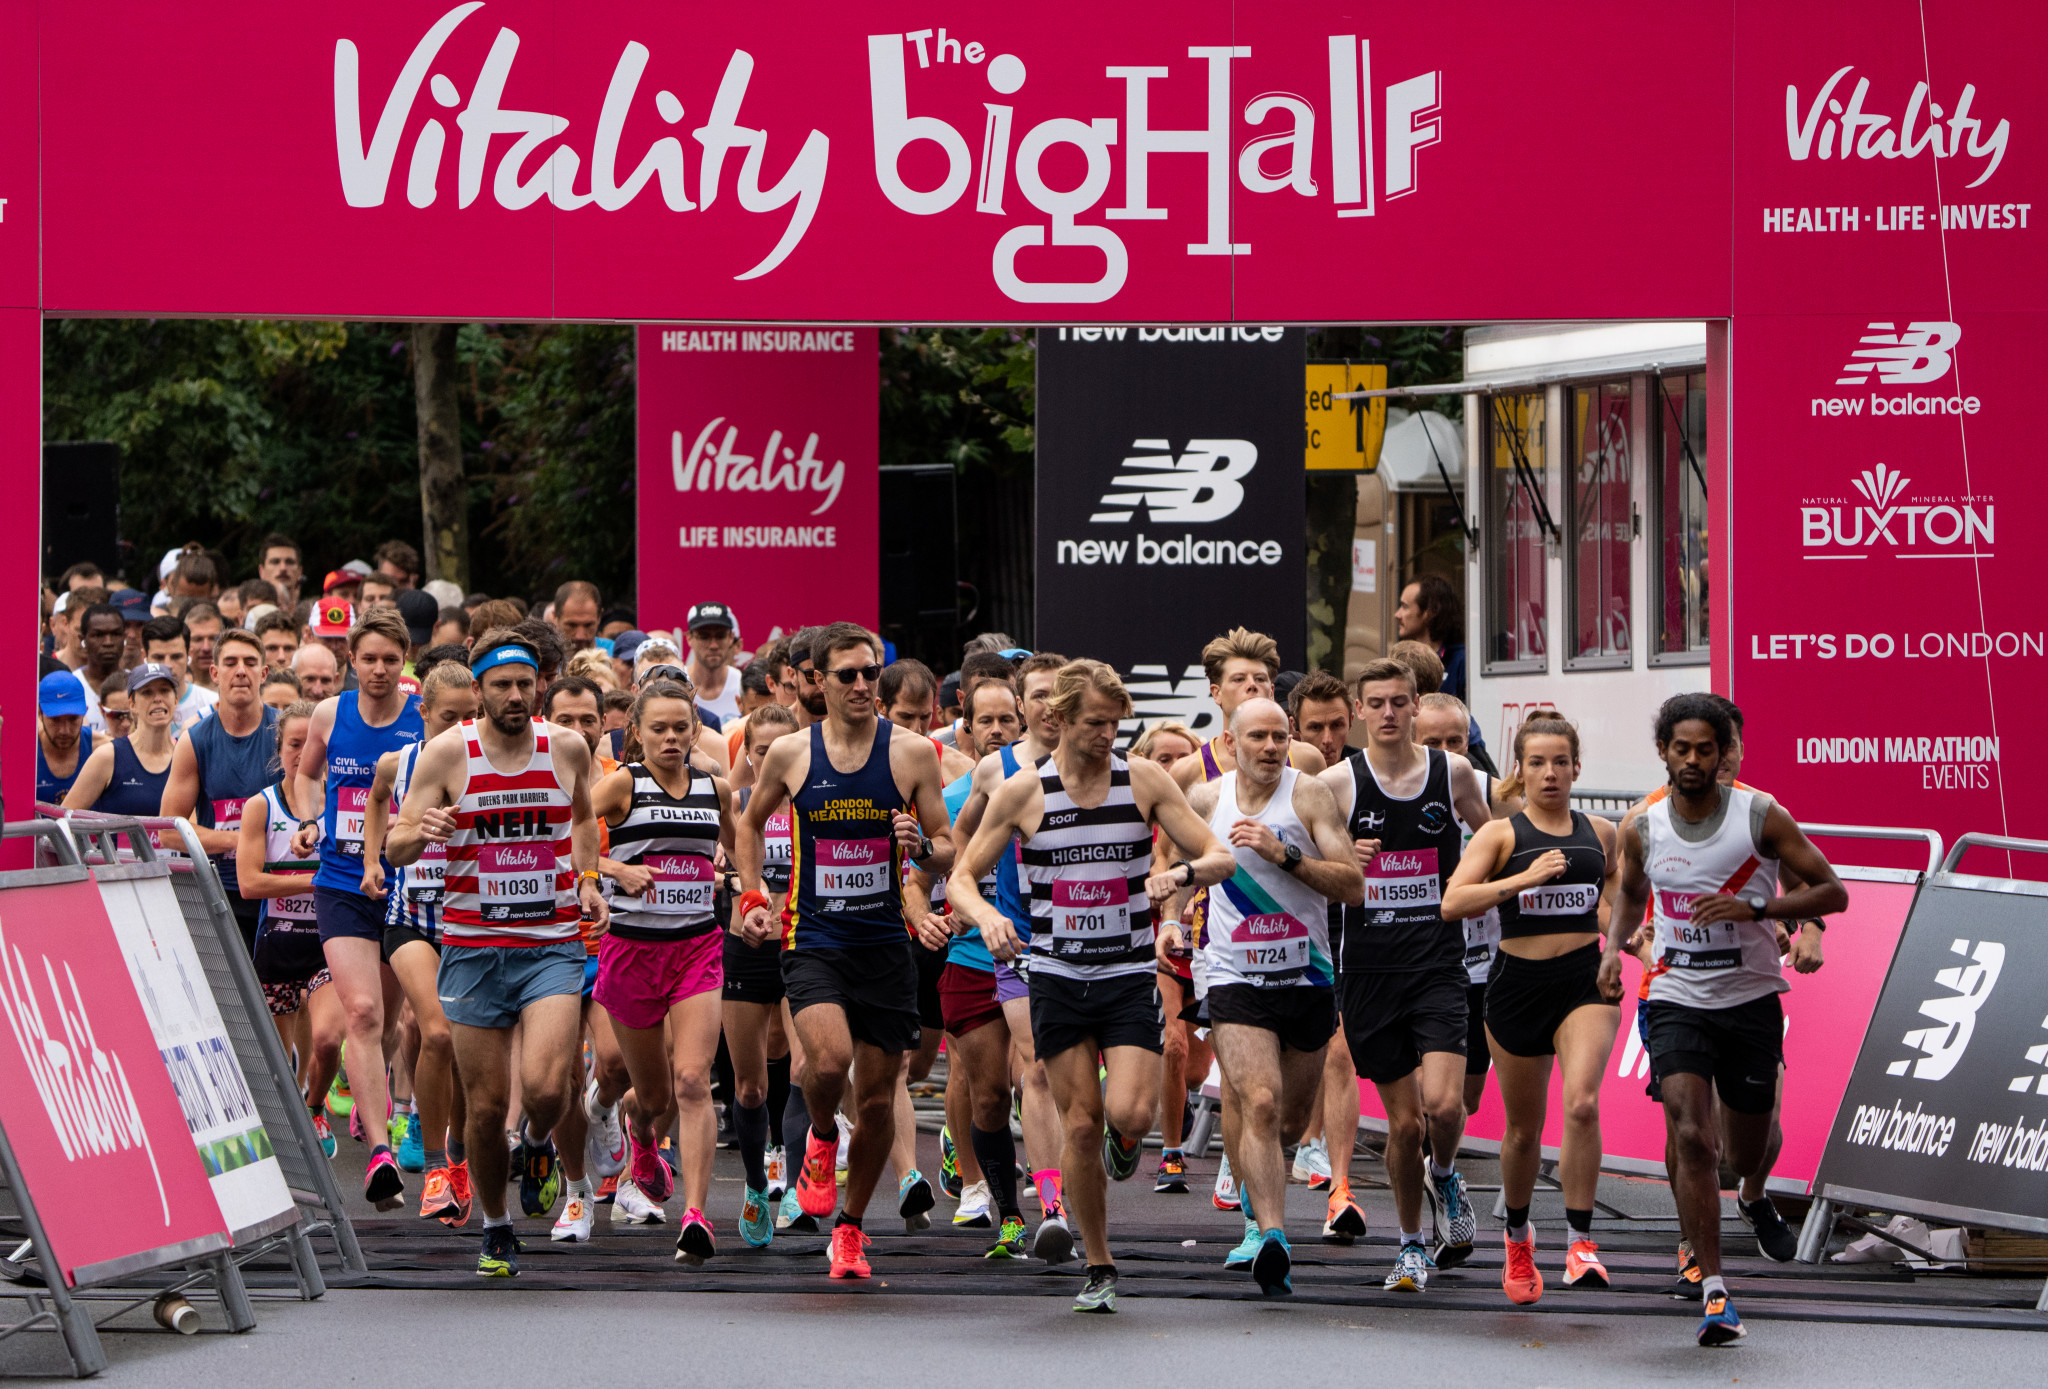  Over 10,000 people came together for The Big Half race ©The Big Half